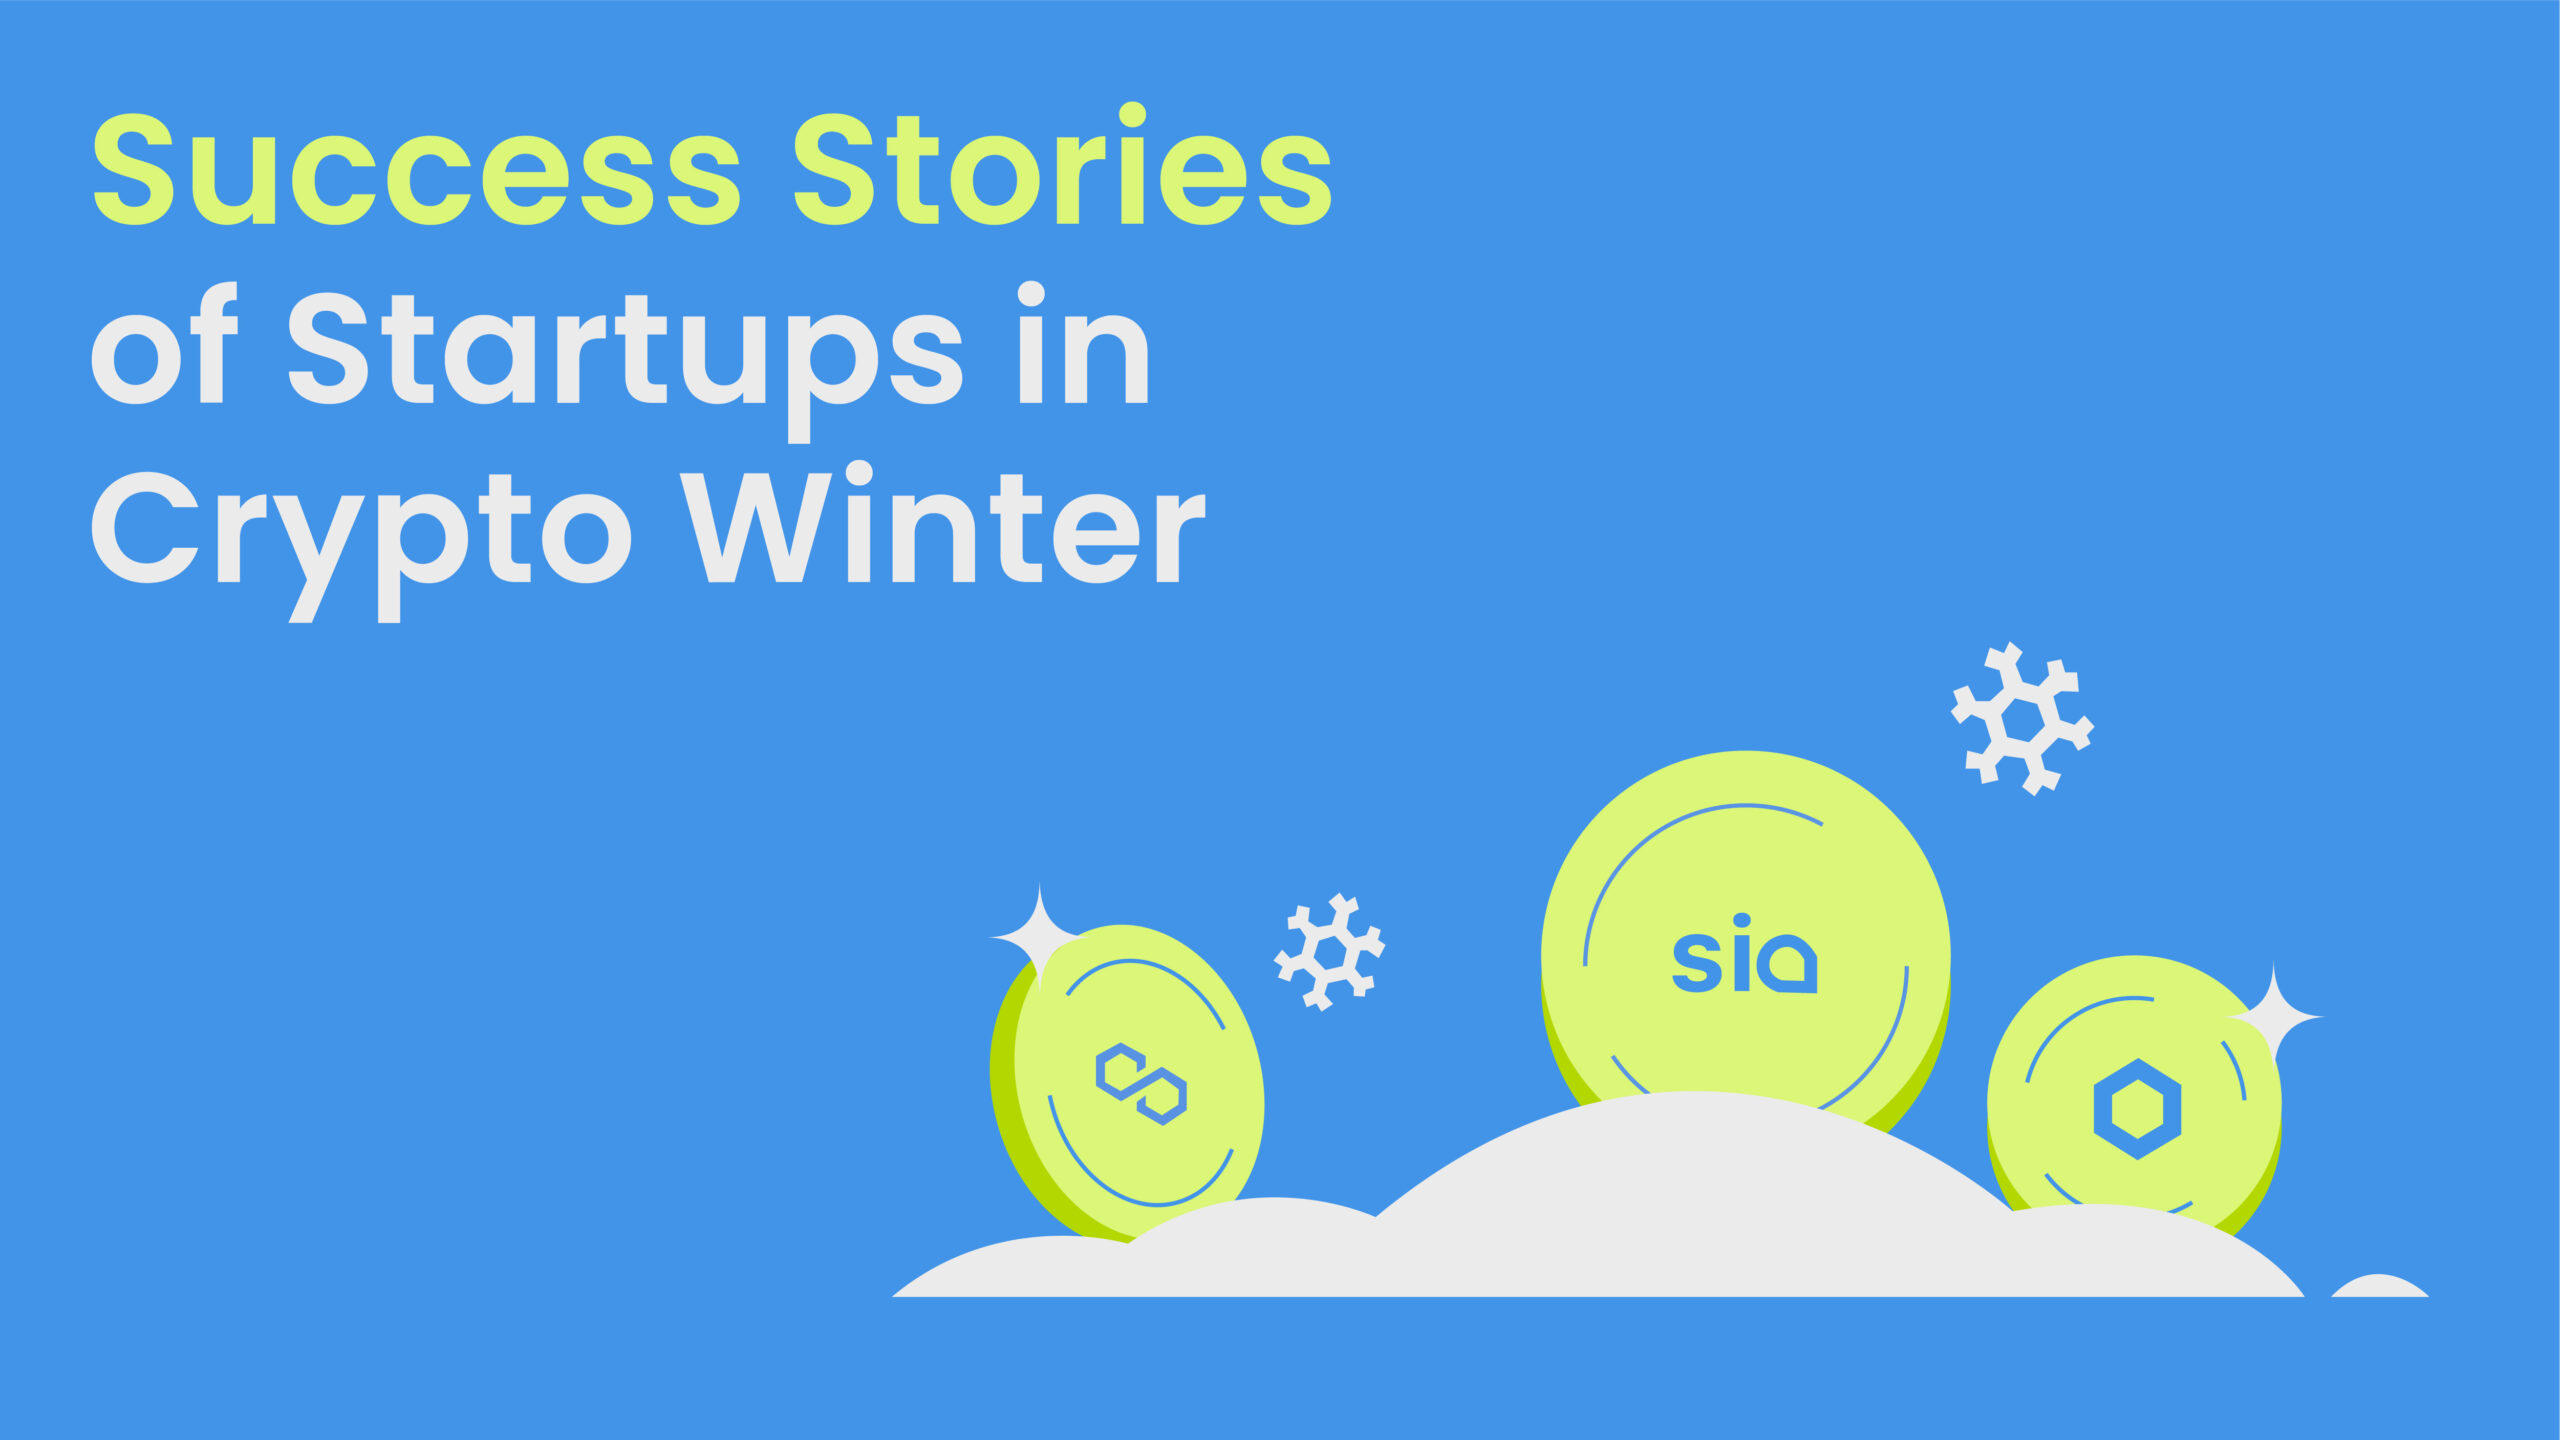 Born in Winter: What we learn from 3 crypto startups that survived